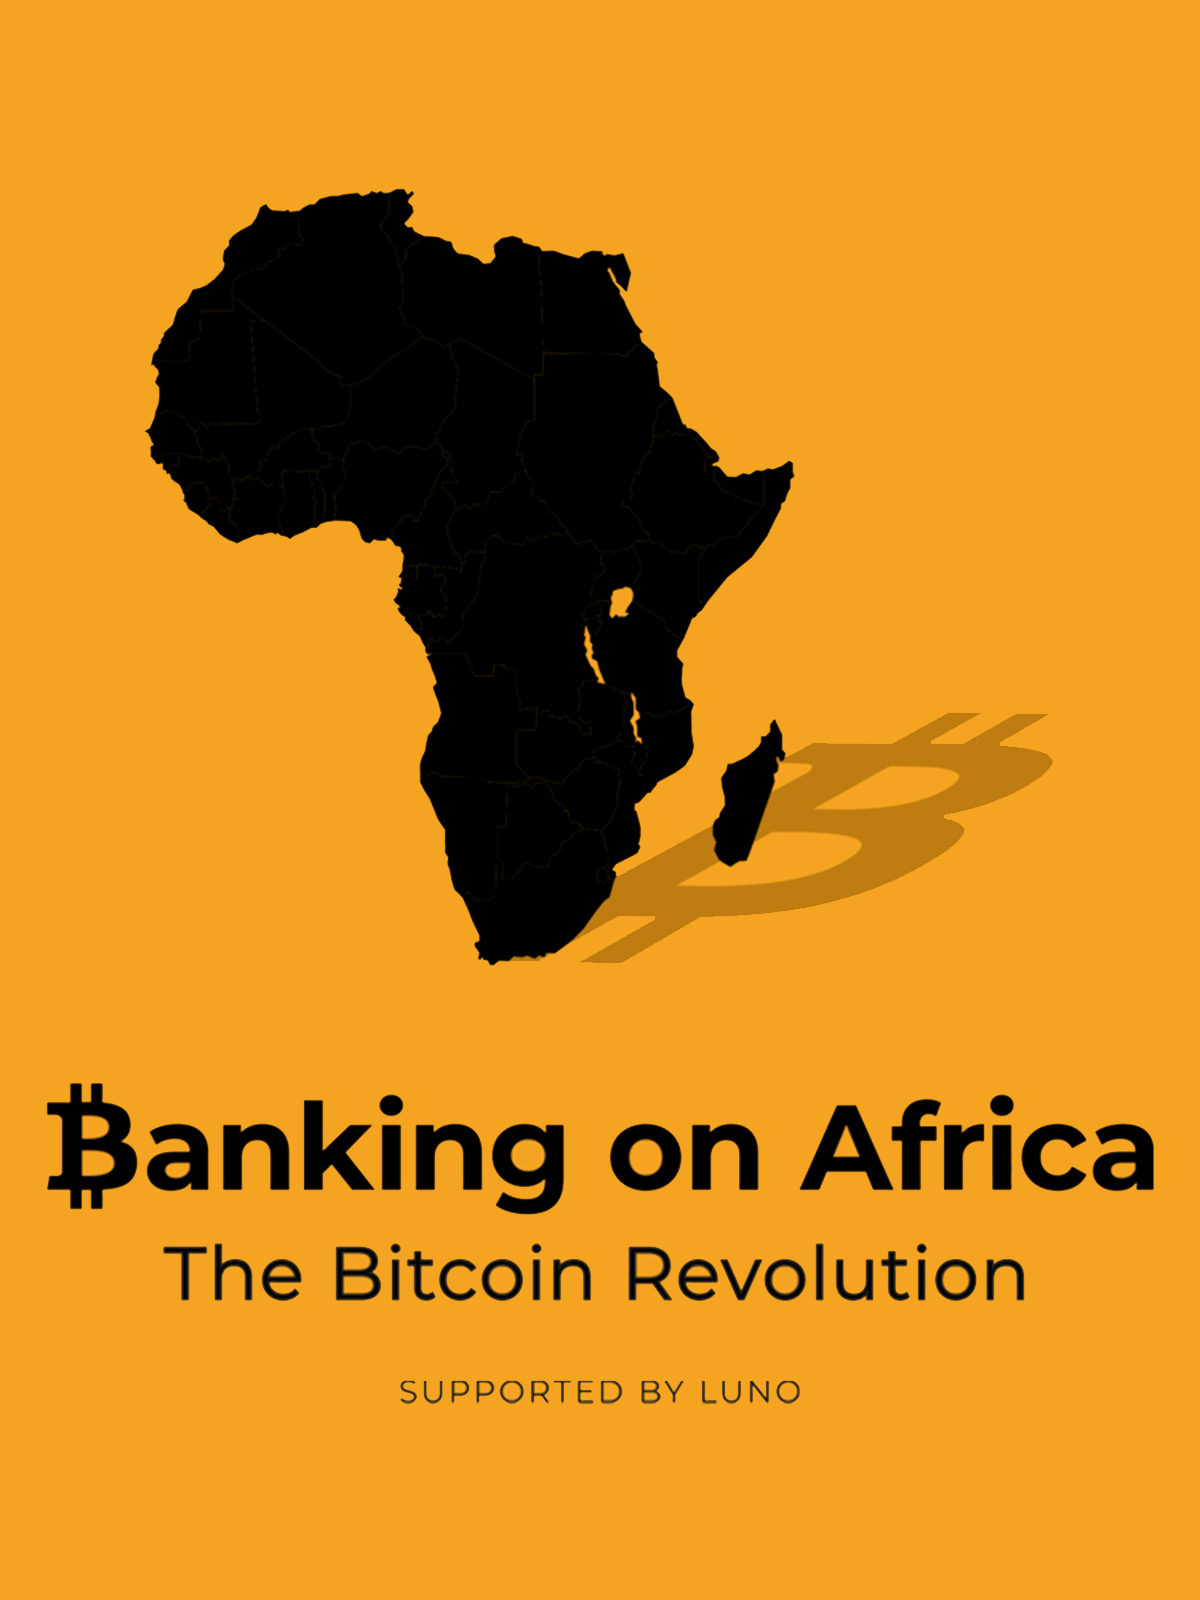 Anita Posch on Why ‘Bitcoin Is a Tool for Freedom’ – Especially in Africa - Unchained